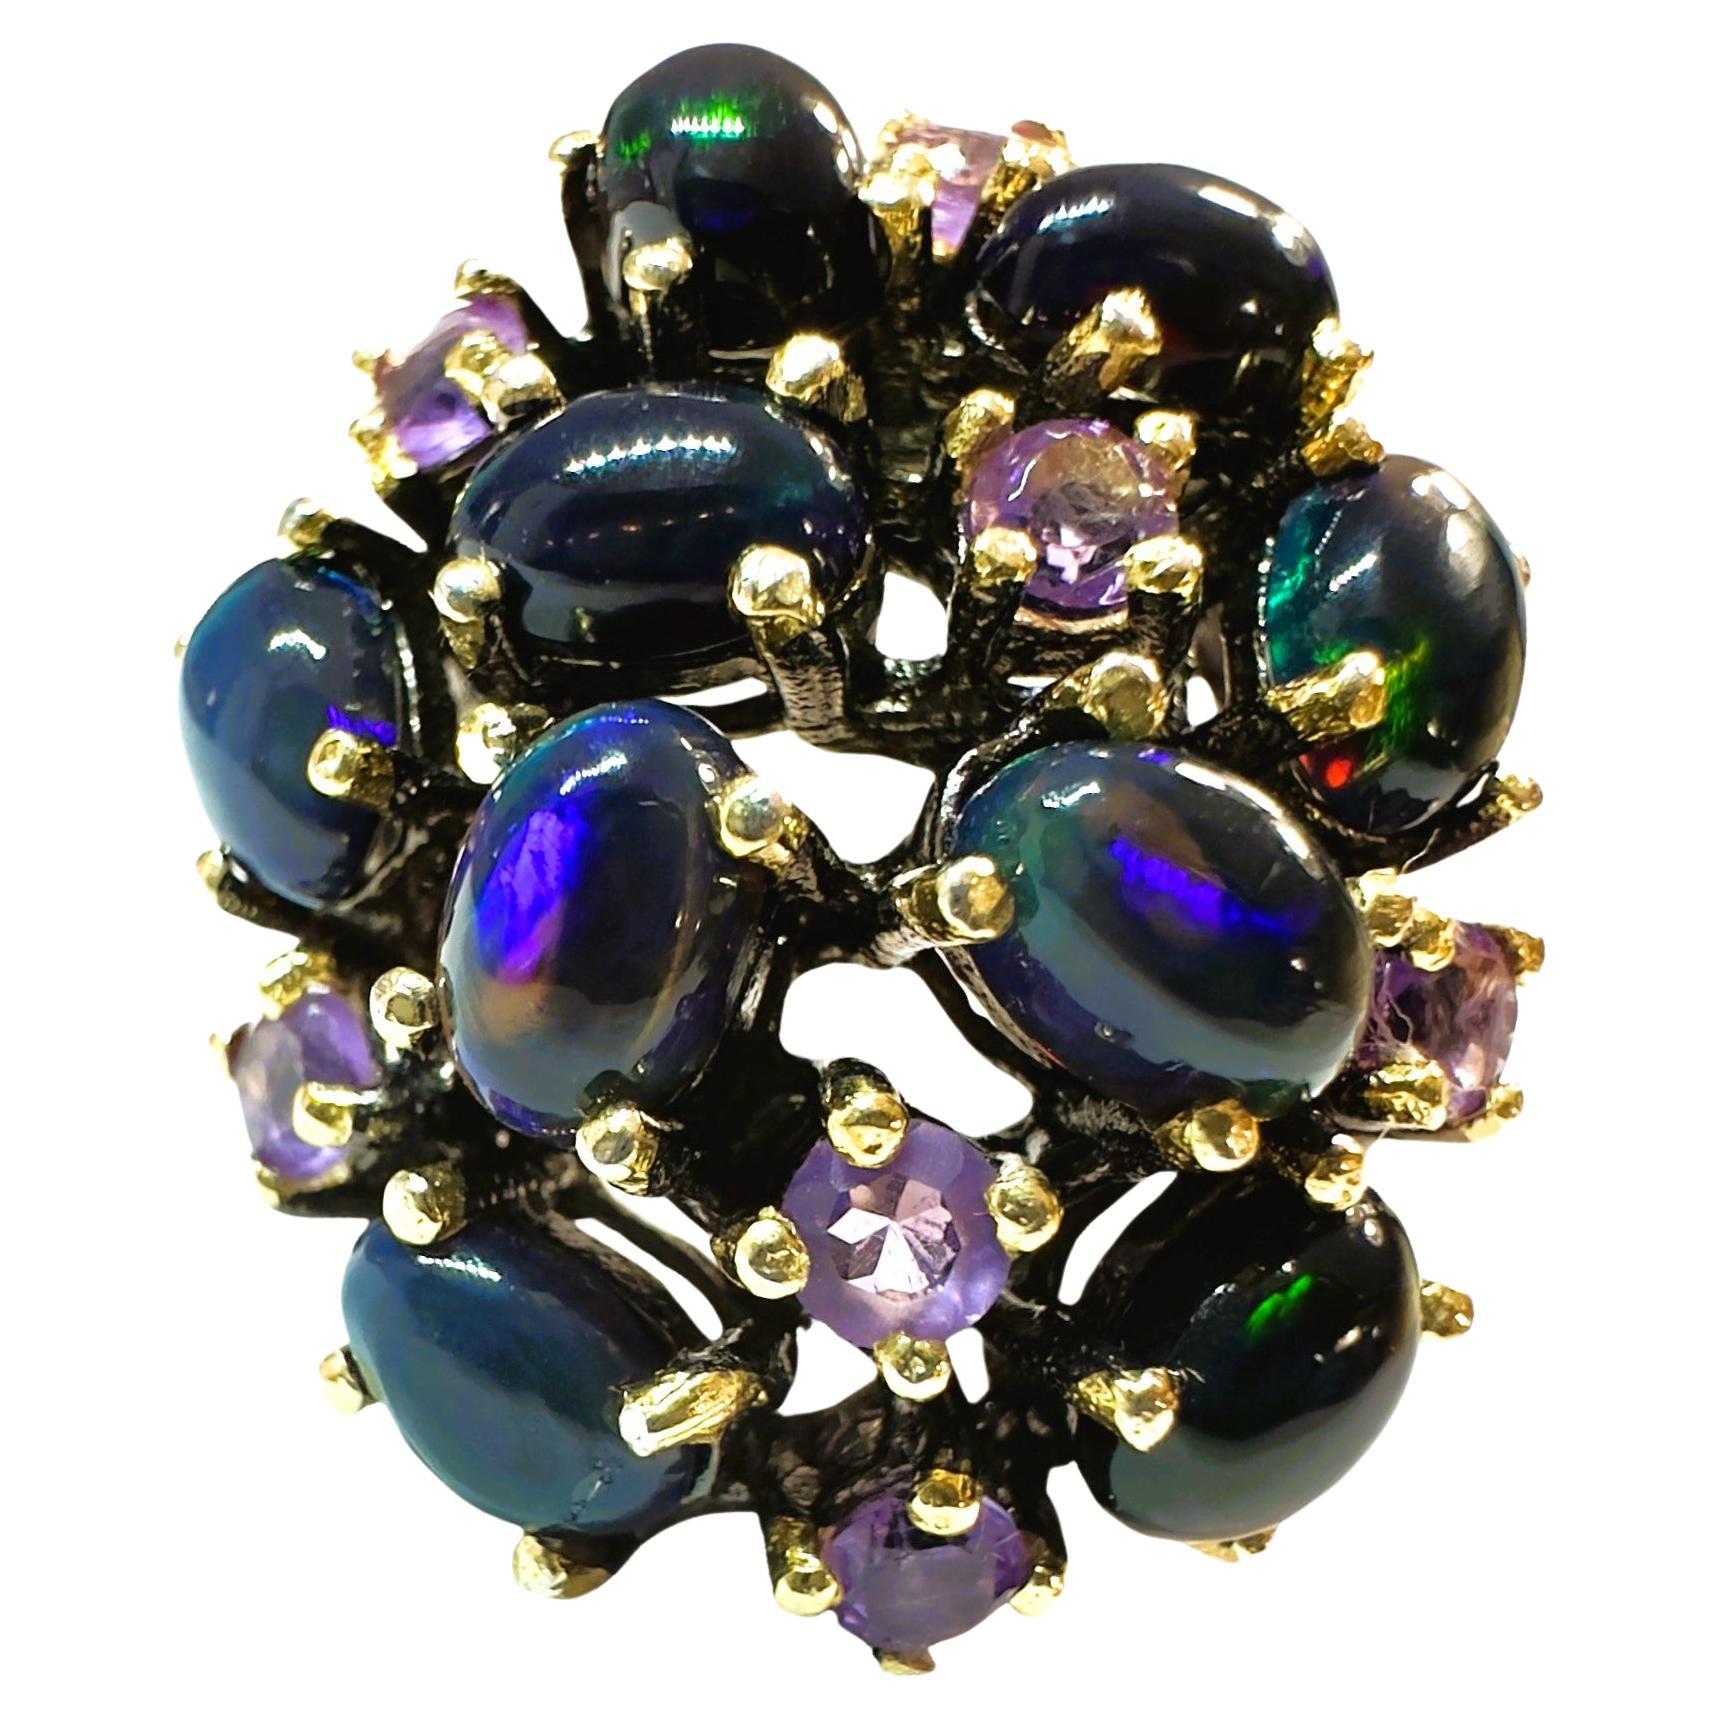 New Handmade Ethiopian Black Opal & Amethyst Ring in Oxi-black Sterling Silver For Sale